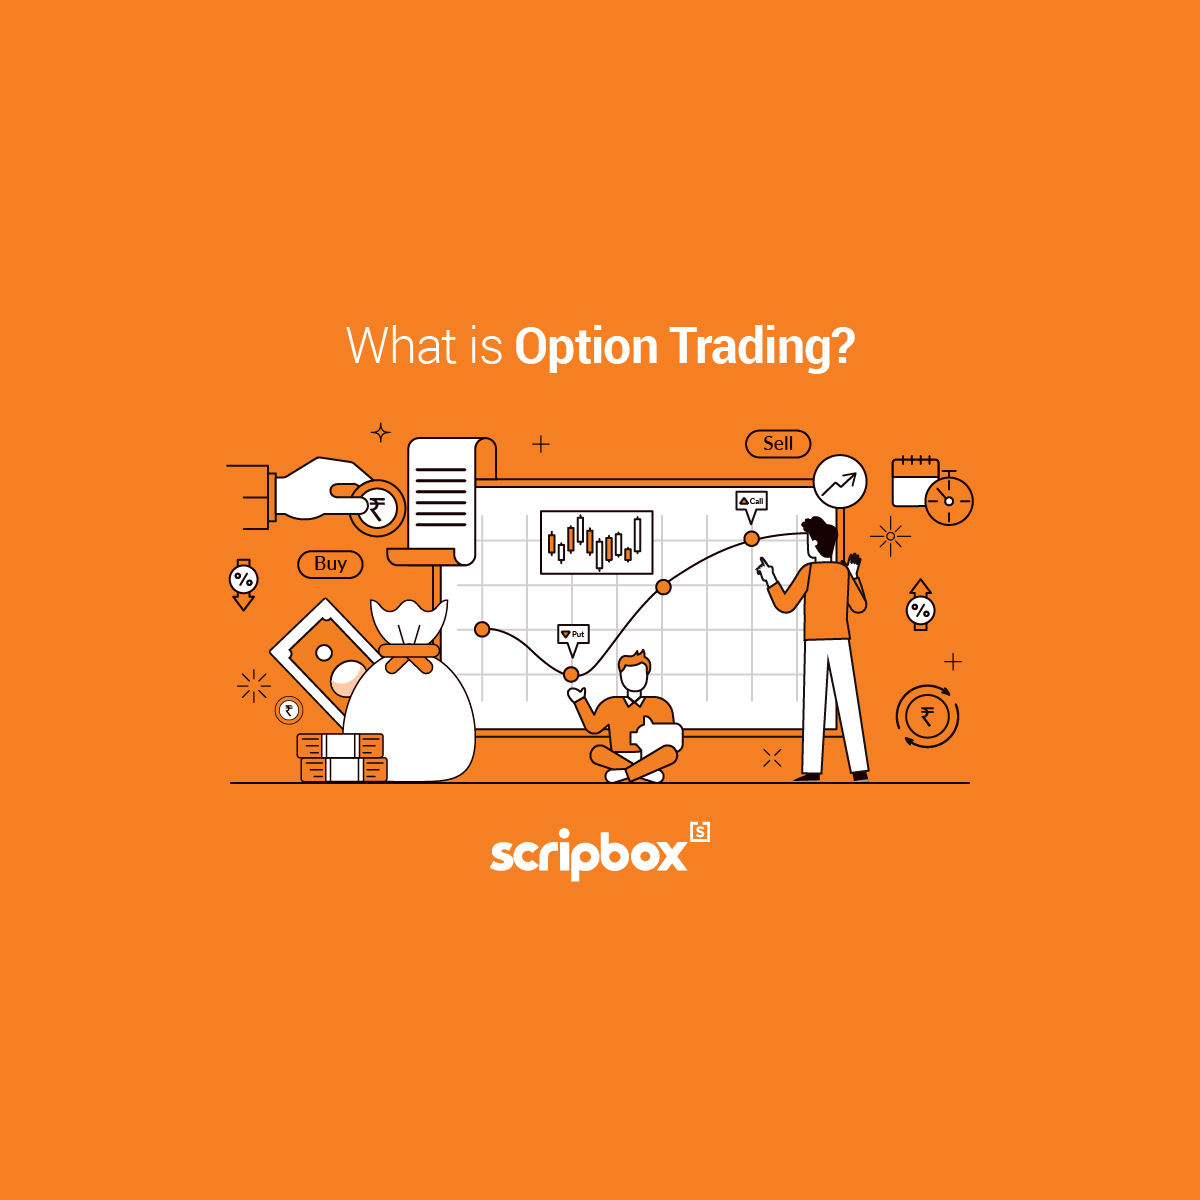 What is Option Trading?